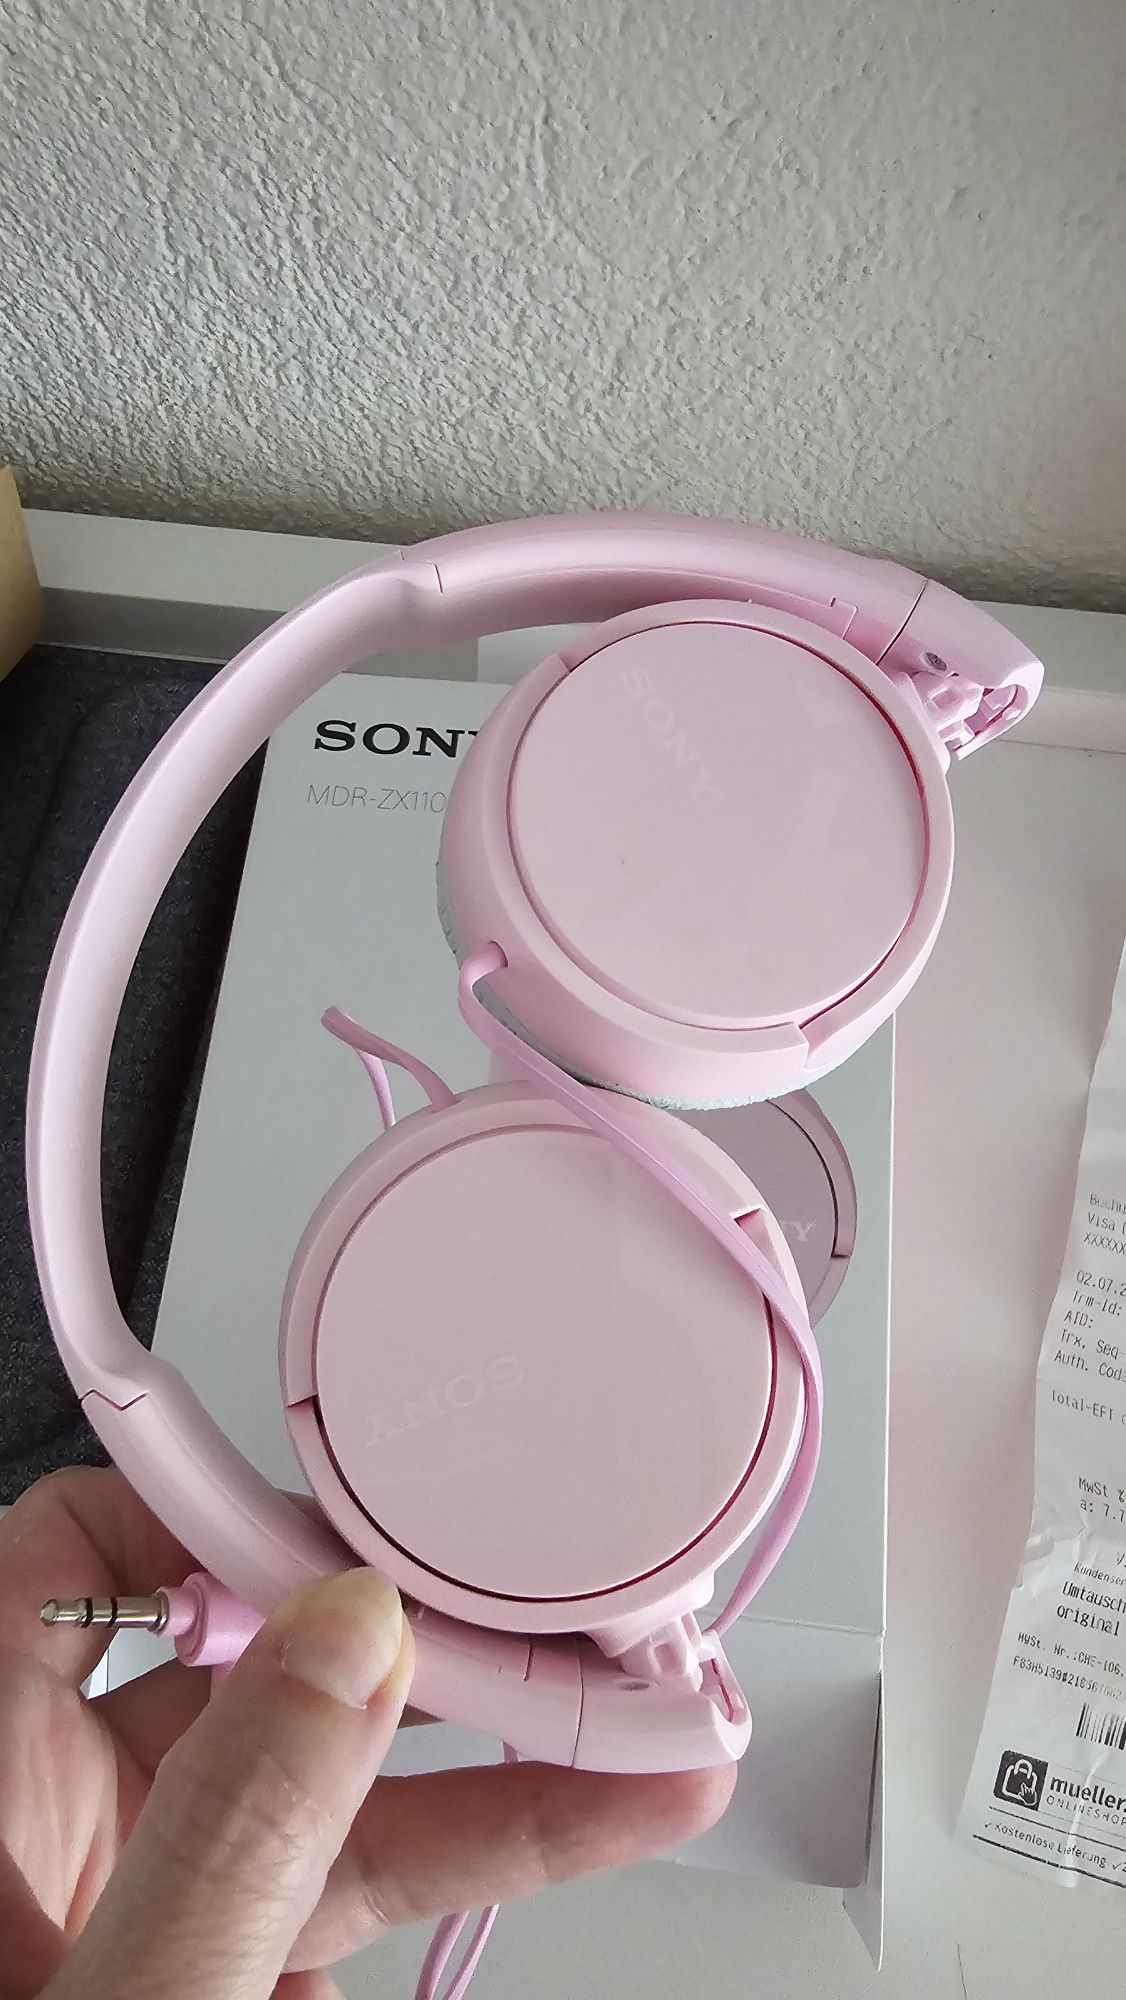 Навушники SONY MDR-ZX110
MDR-ZX110 MDR-ZX110
MDR-ZX110